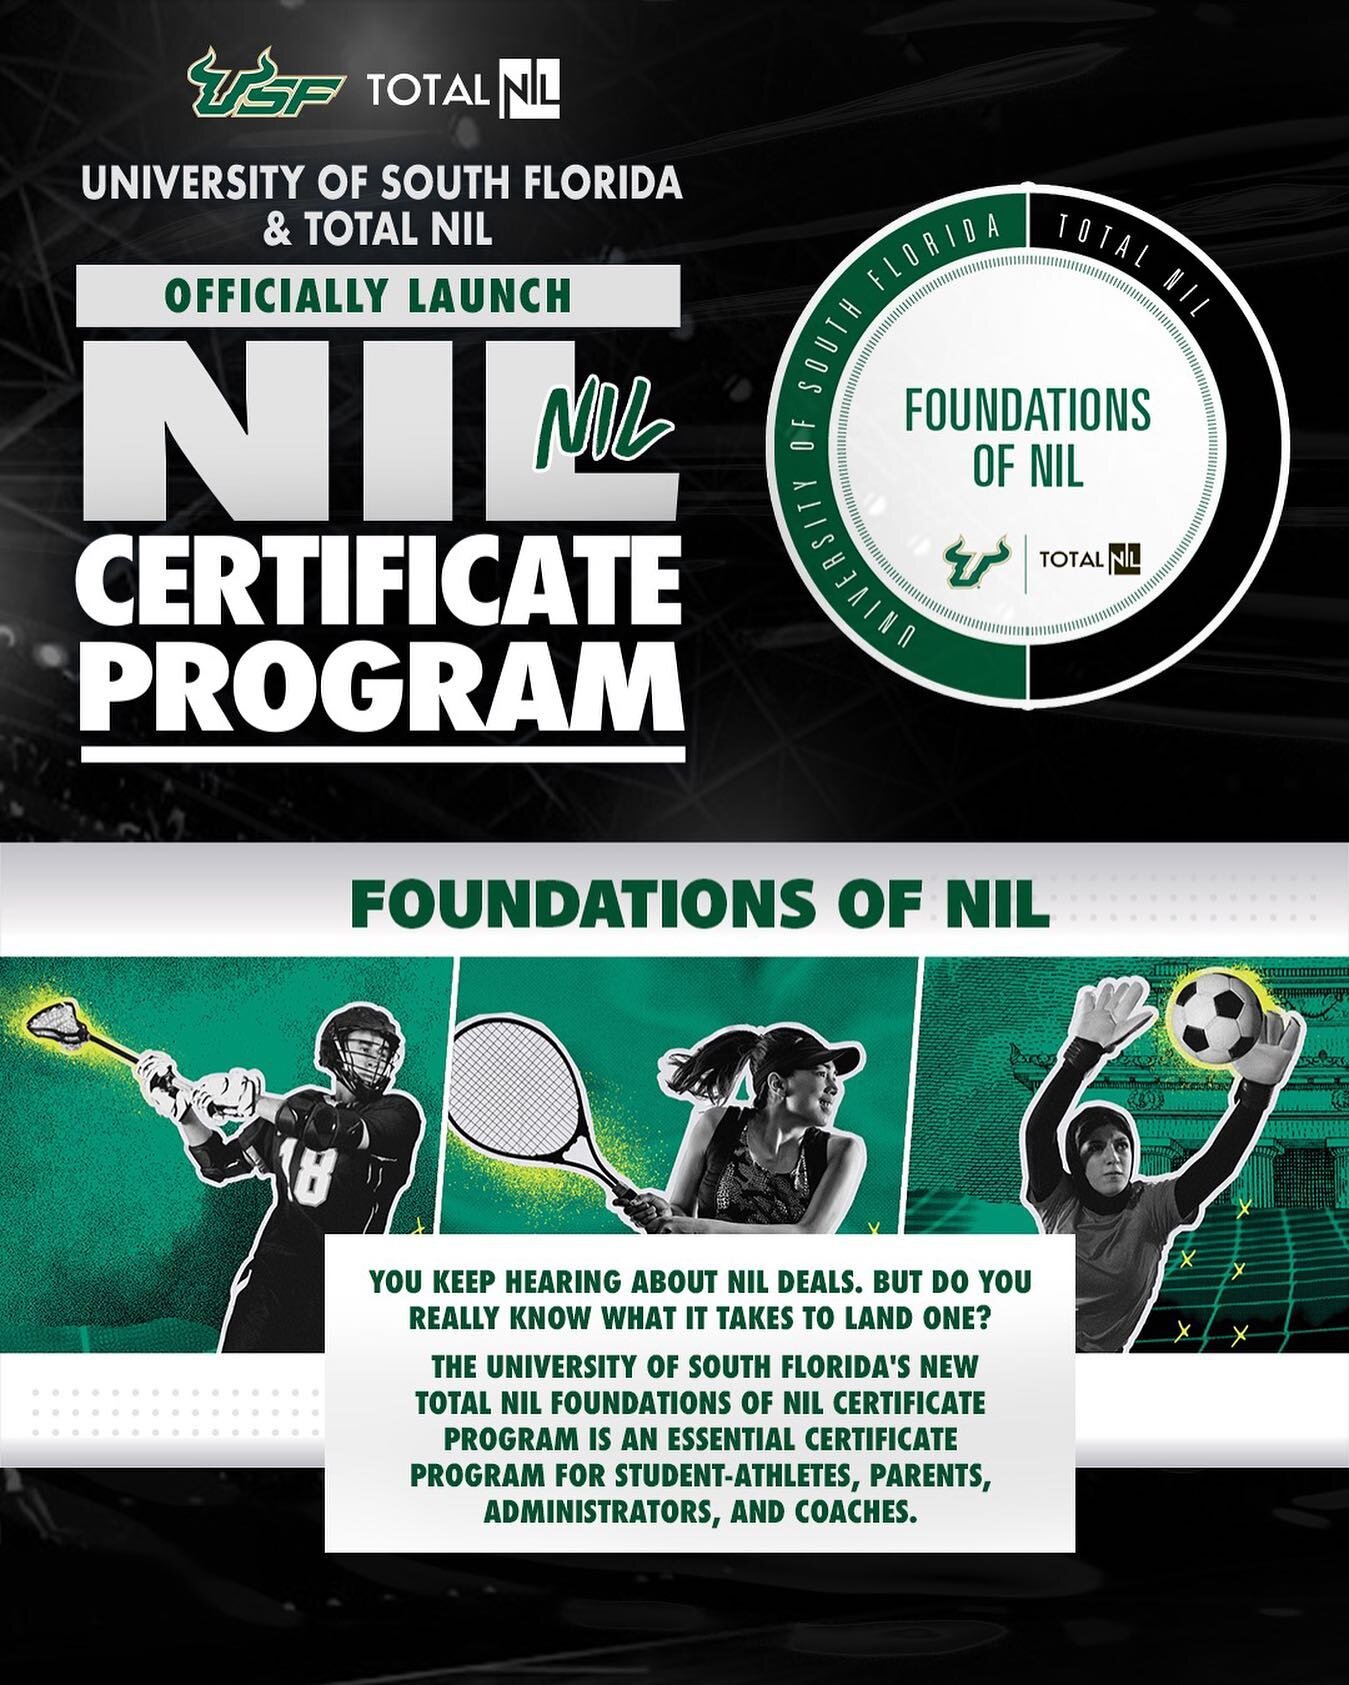 Total NIL has partnered with the University of South Florida on a Foundations of NIL certification program. 

Whether you are an athlete, parent, administrator or coach, this self-paced course was designed for you. 

See the full release for more inf